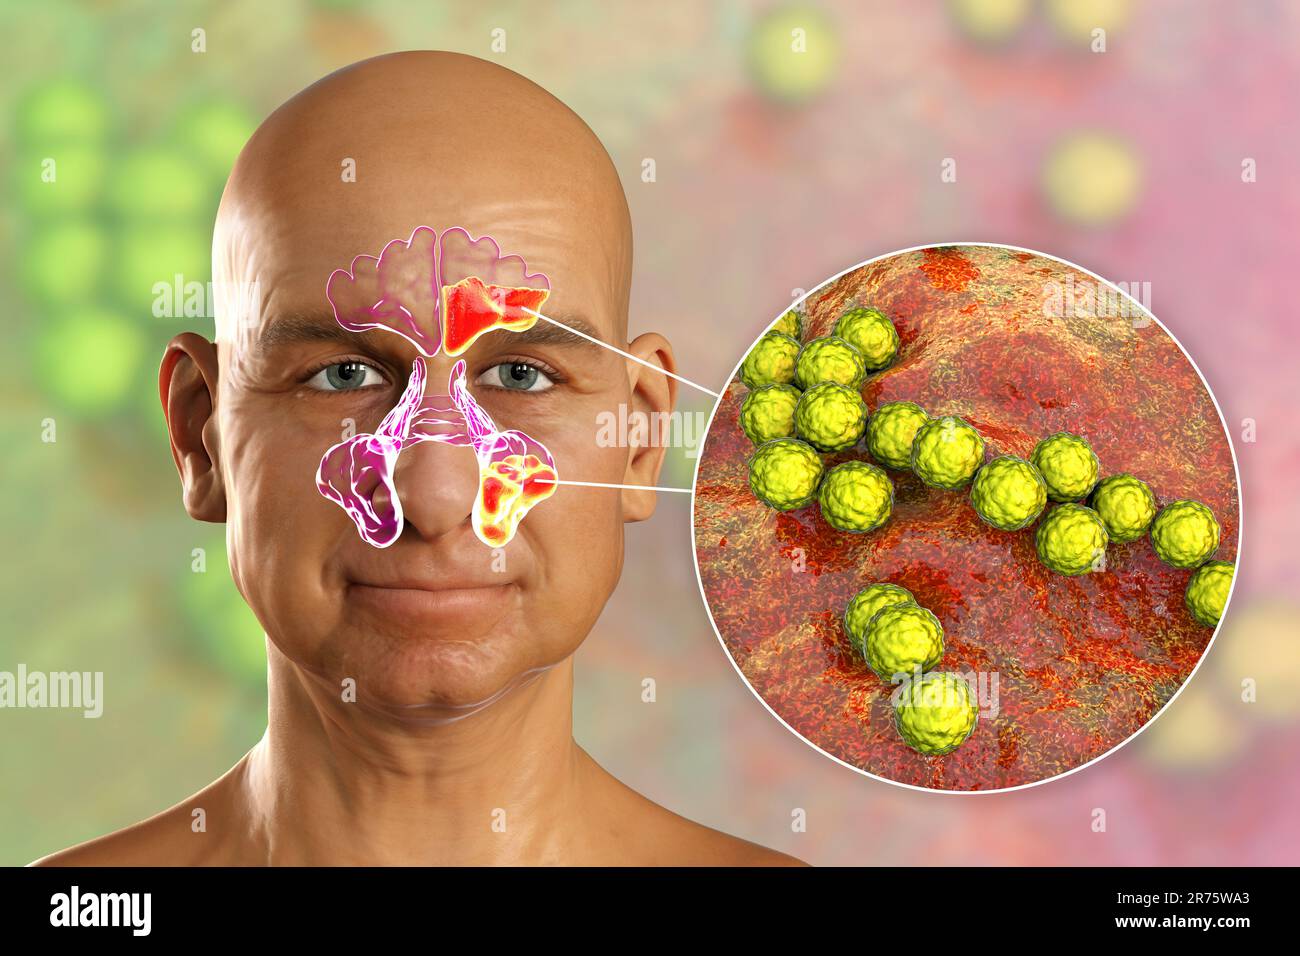 Streptococcus pyogenes bacteria as a cause of sinusitis. Comouter illustration showing purulent inflammation of frontal and maxillary sinuses and clos Stock Photo